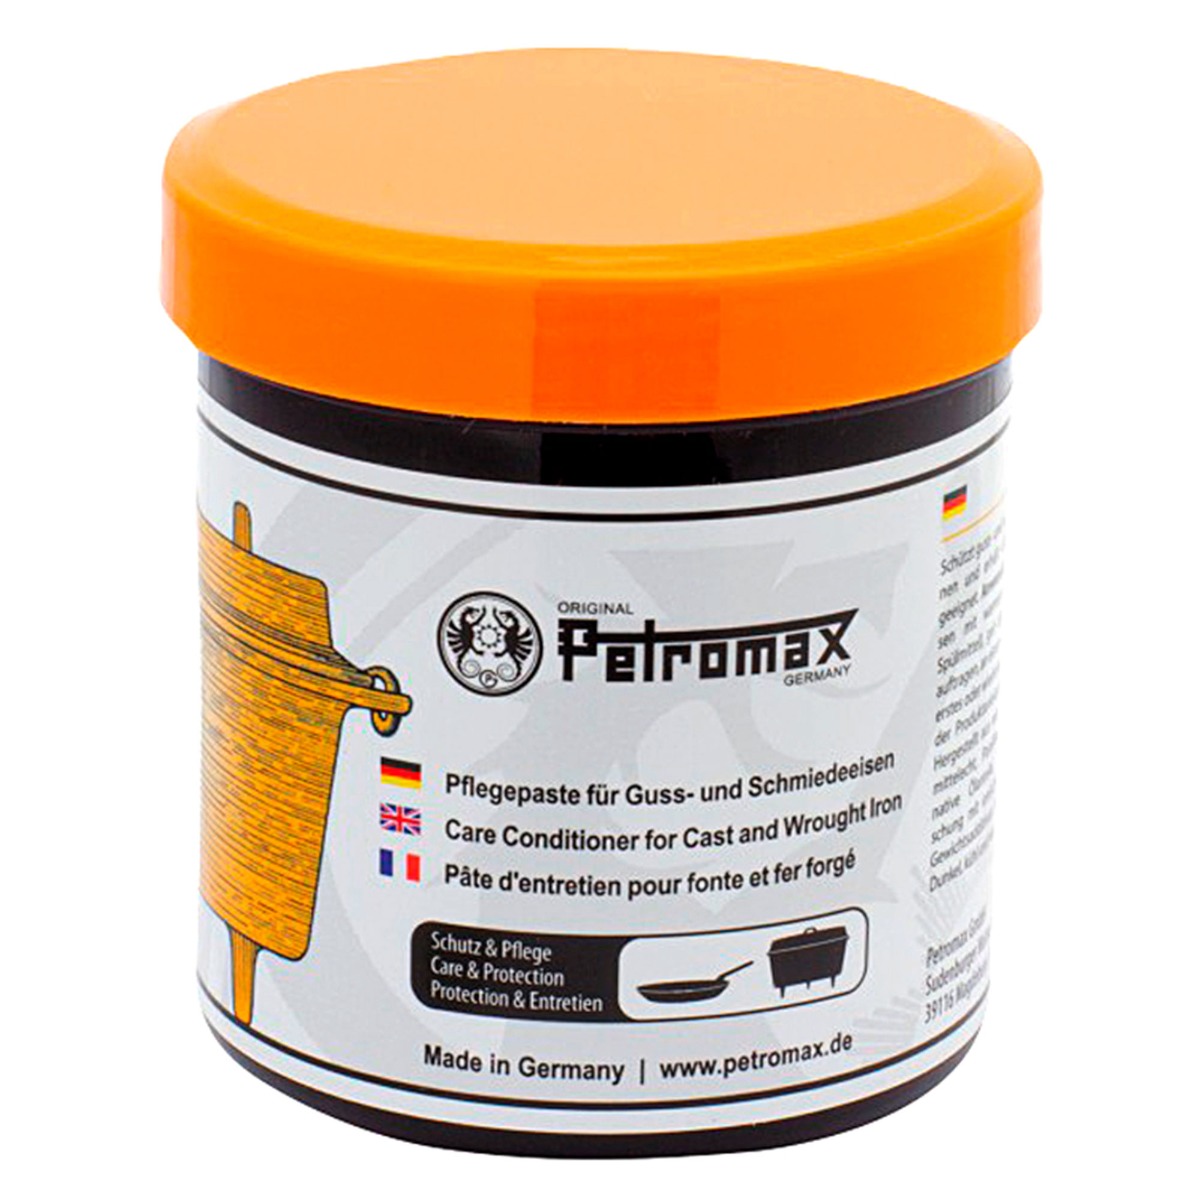 Care Conditioner for Cast and Wrought Iron - Petromax®